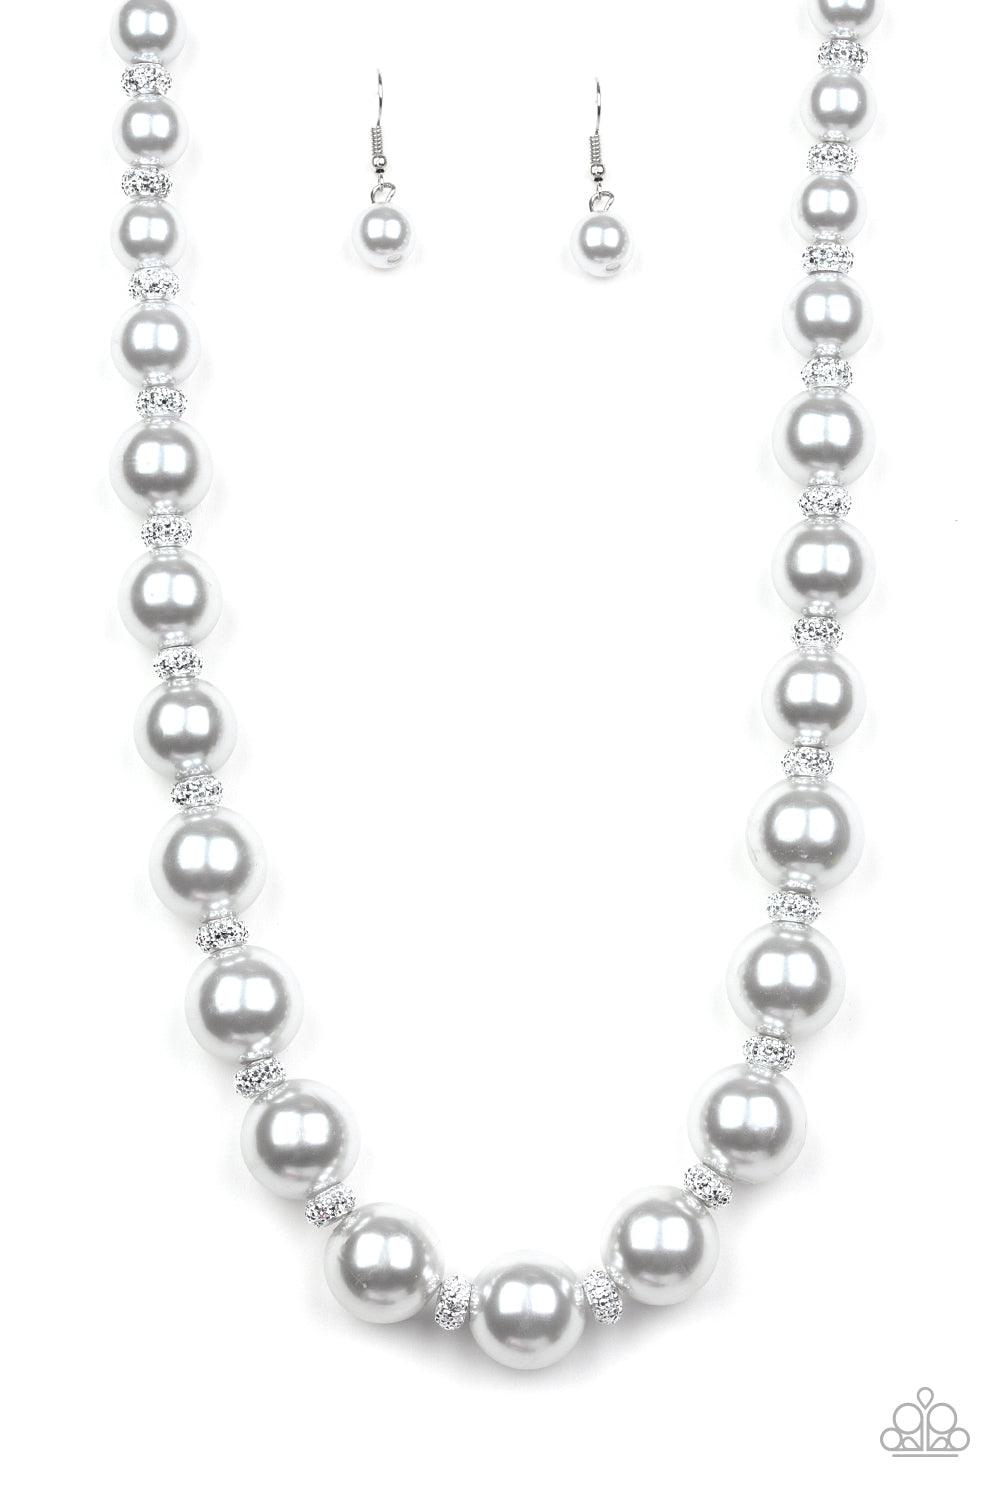 Uptown Heiress Paparazzi Accessories Necklace with Earrings